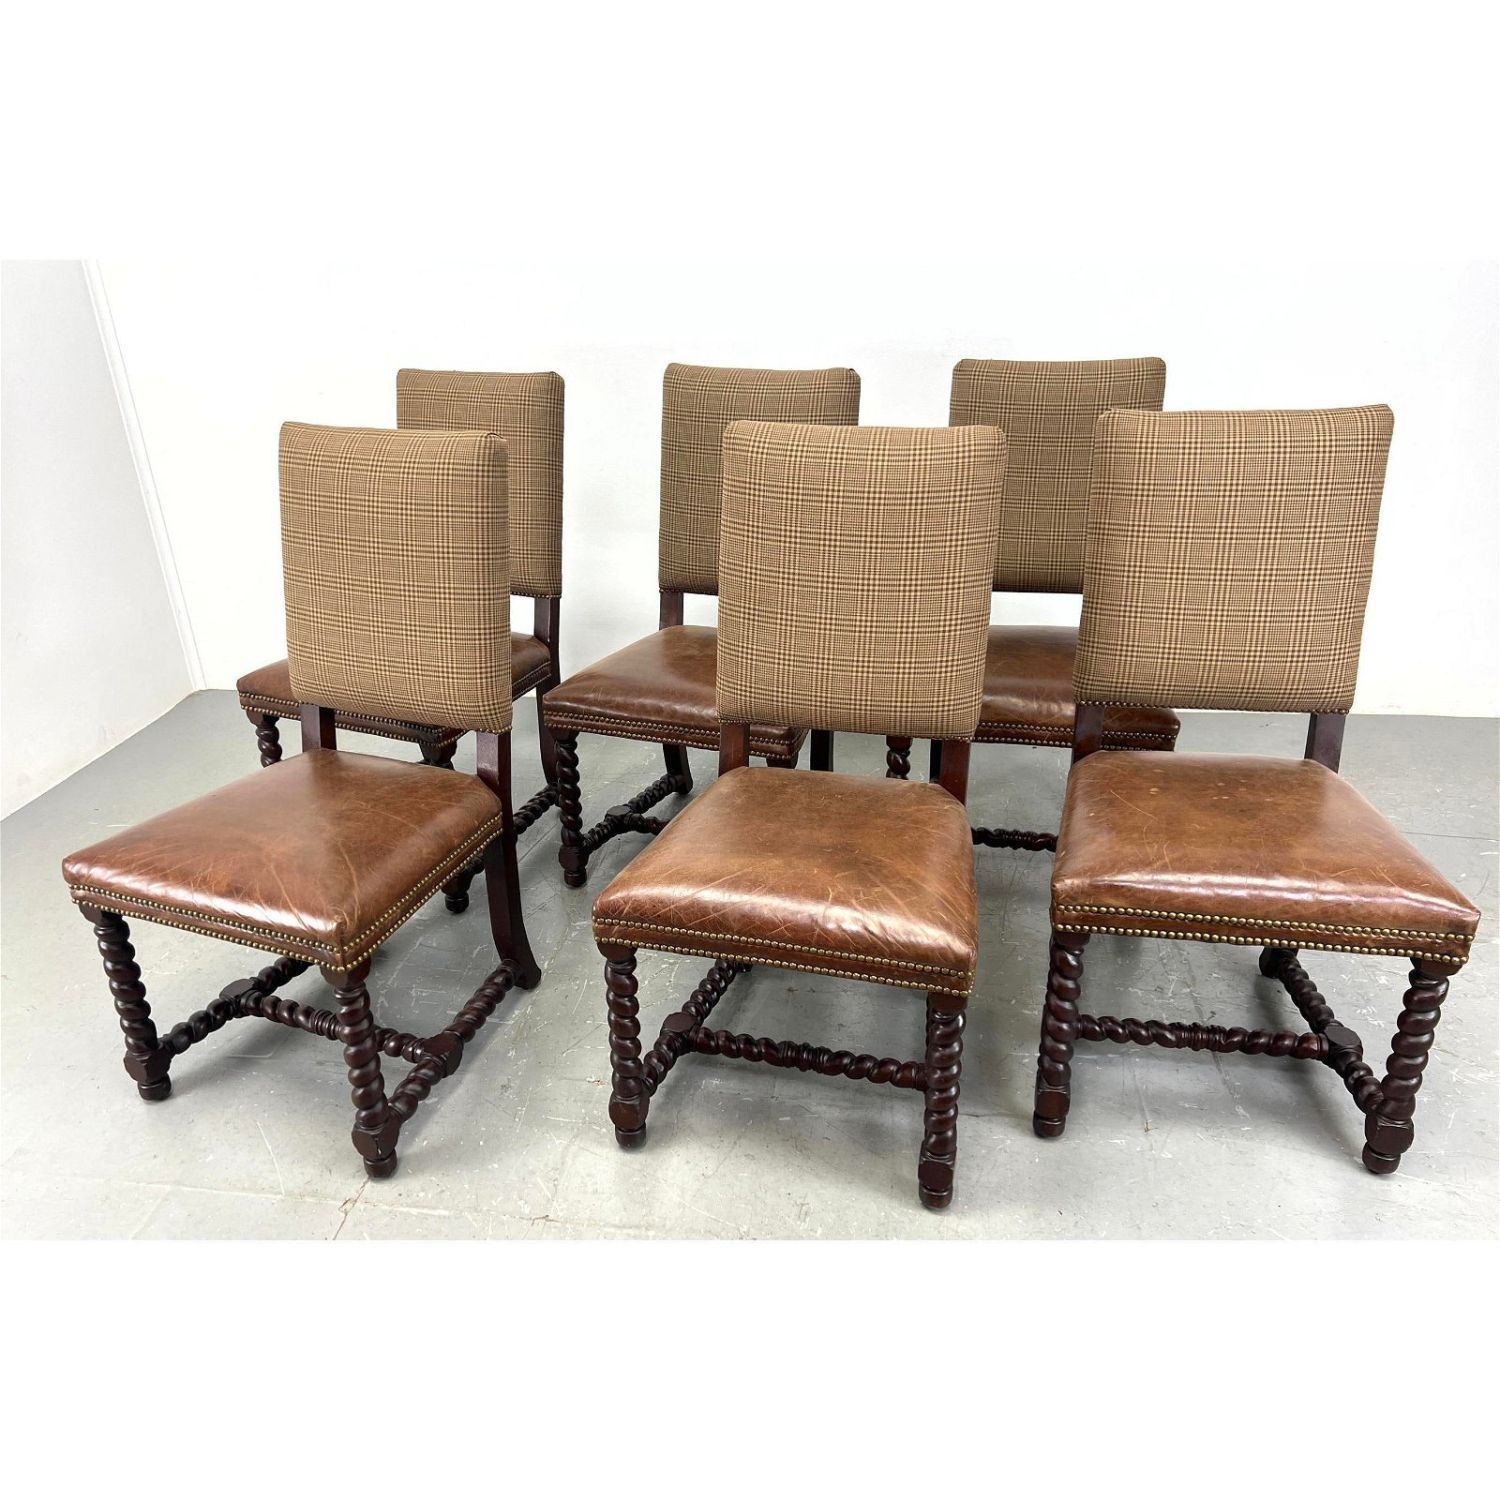 6 Ralph Lauren side chairs with 362b1c